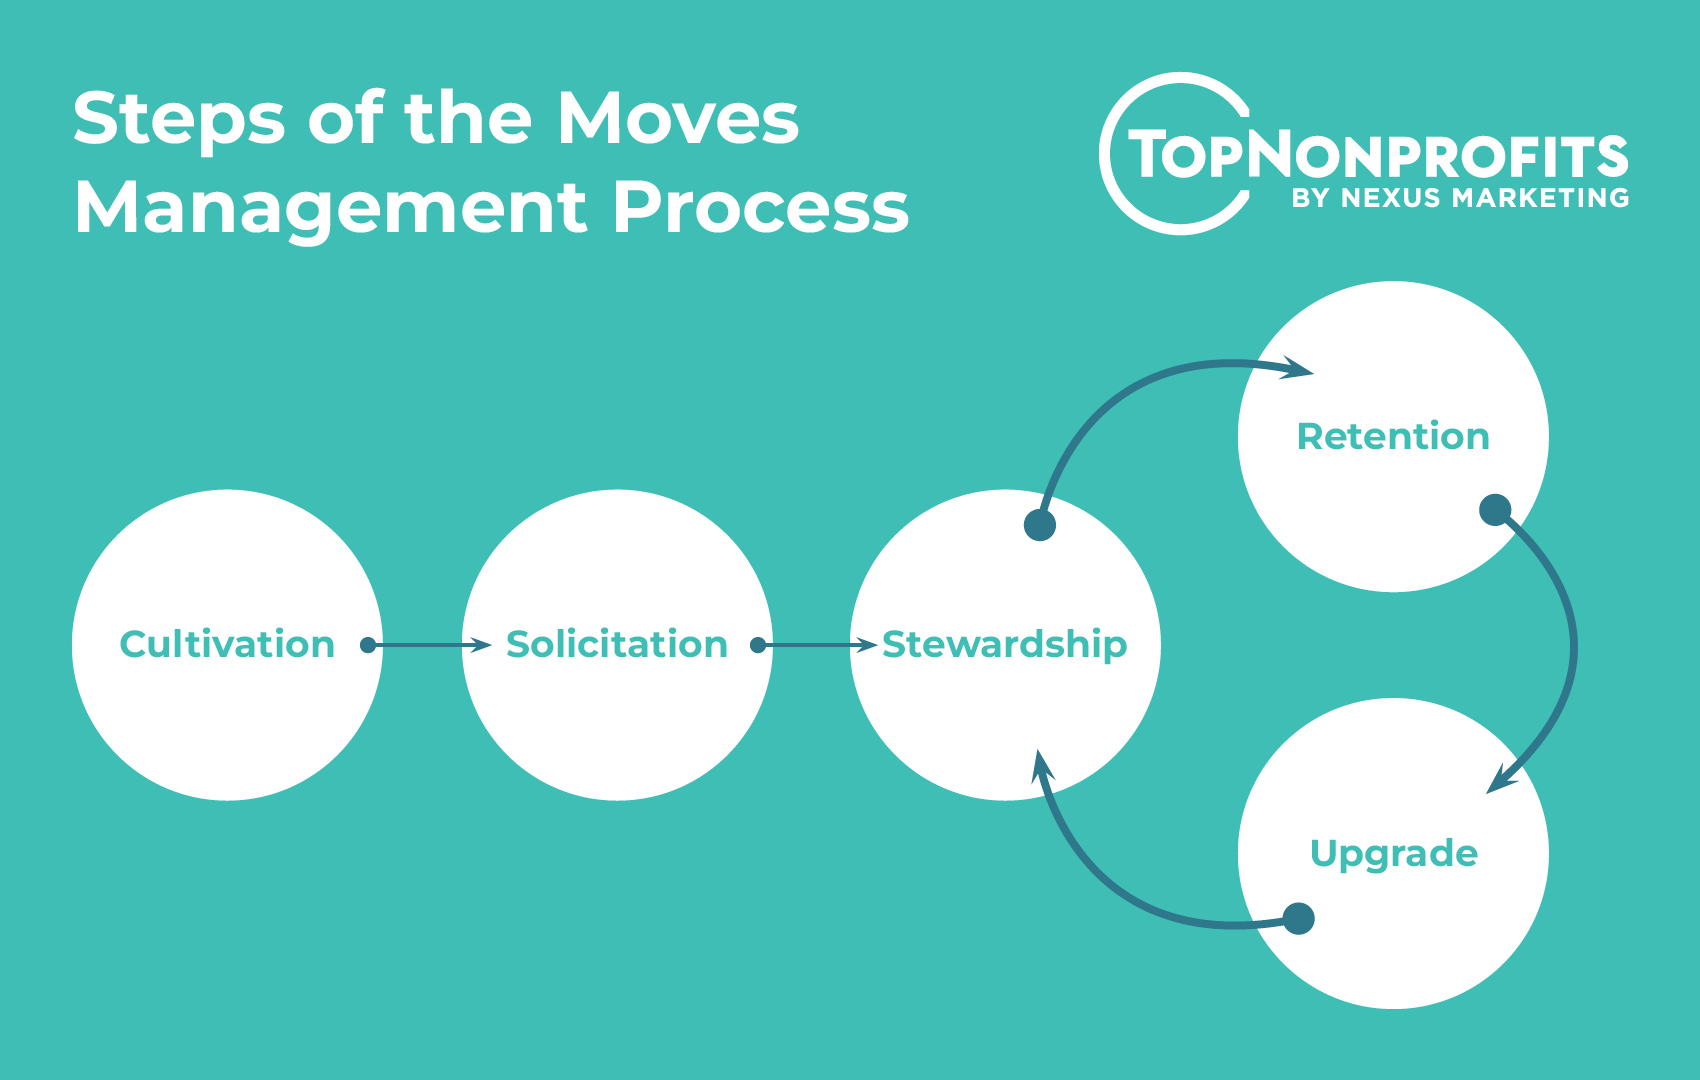 Steps of the moves management process (cultivation, solicitation, and a cyclical process of stewardship, retention, and upgrading).